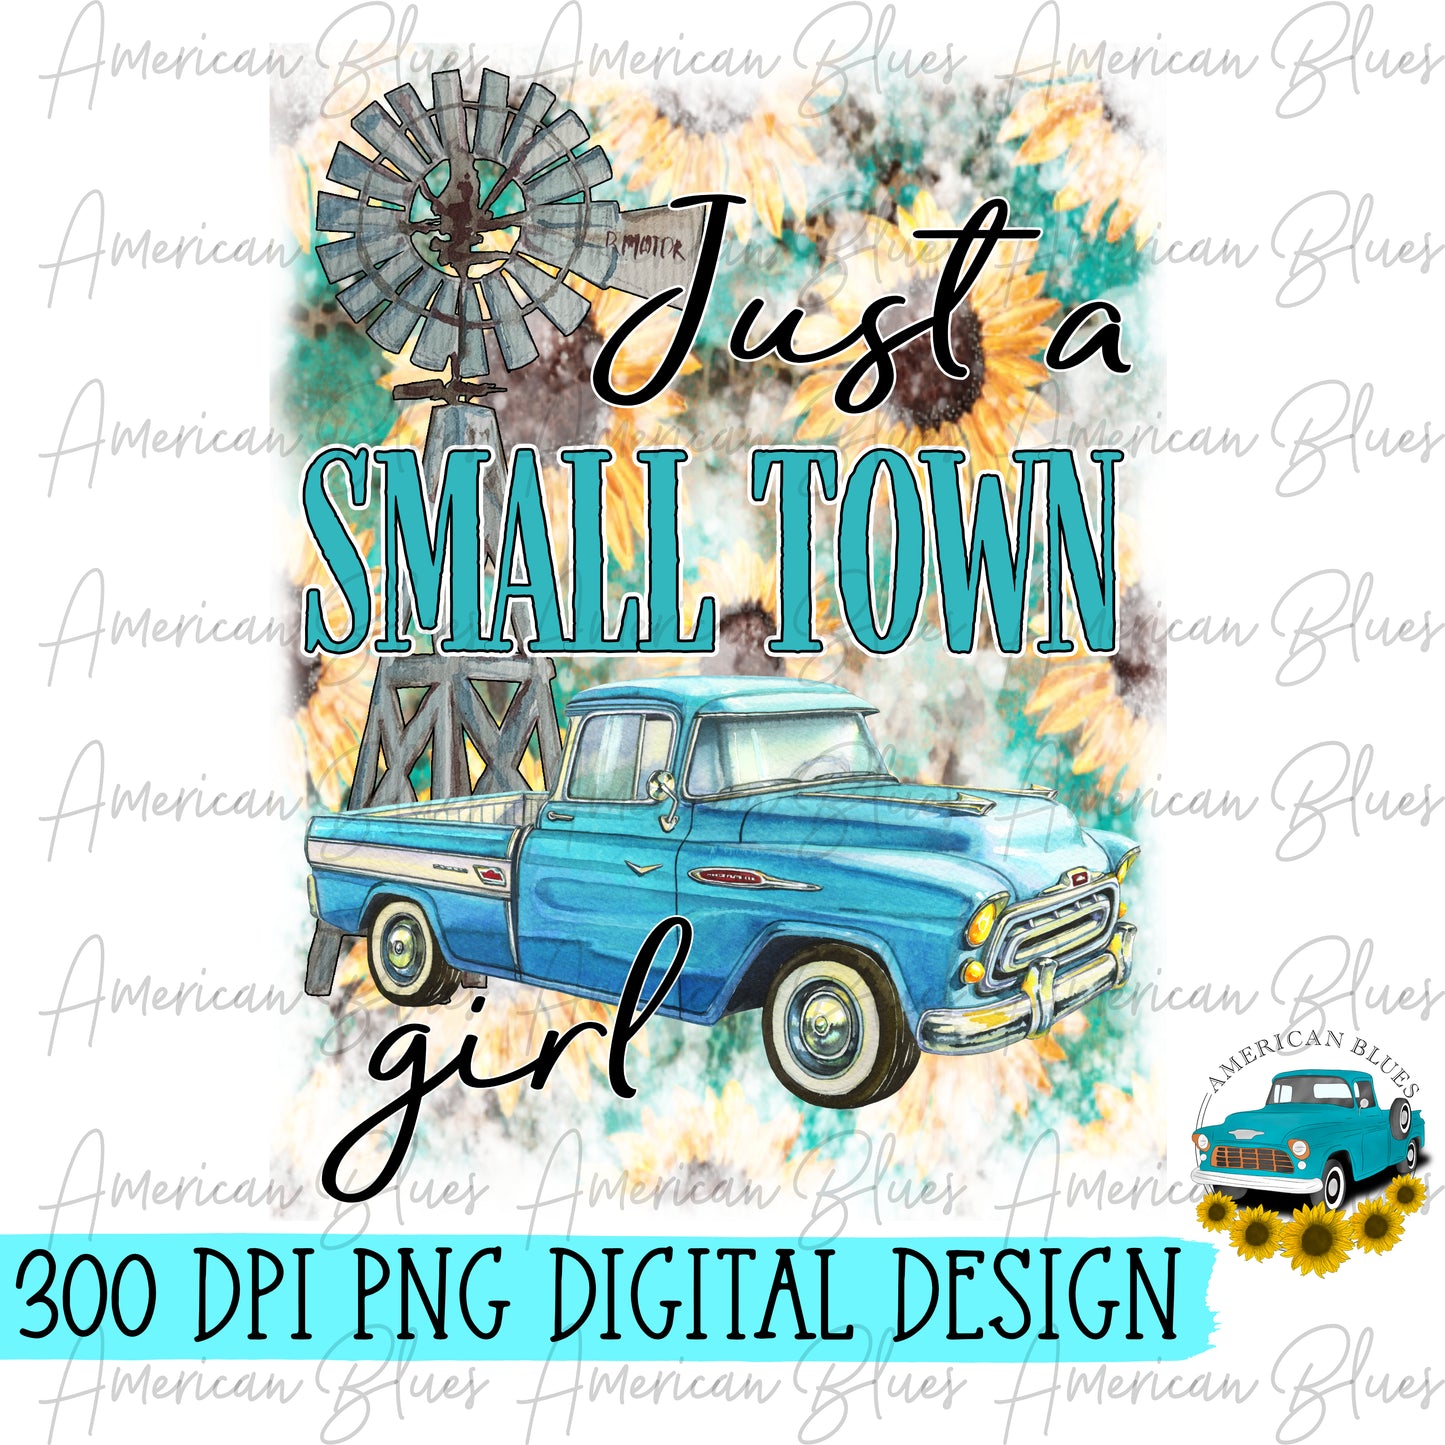 Just a small town girl blue truck- windmill